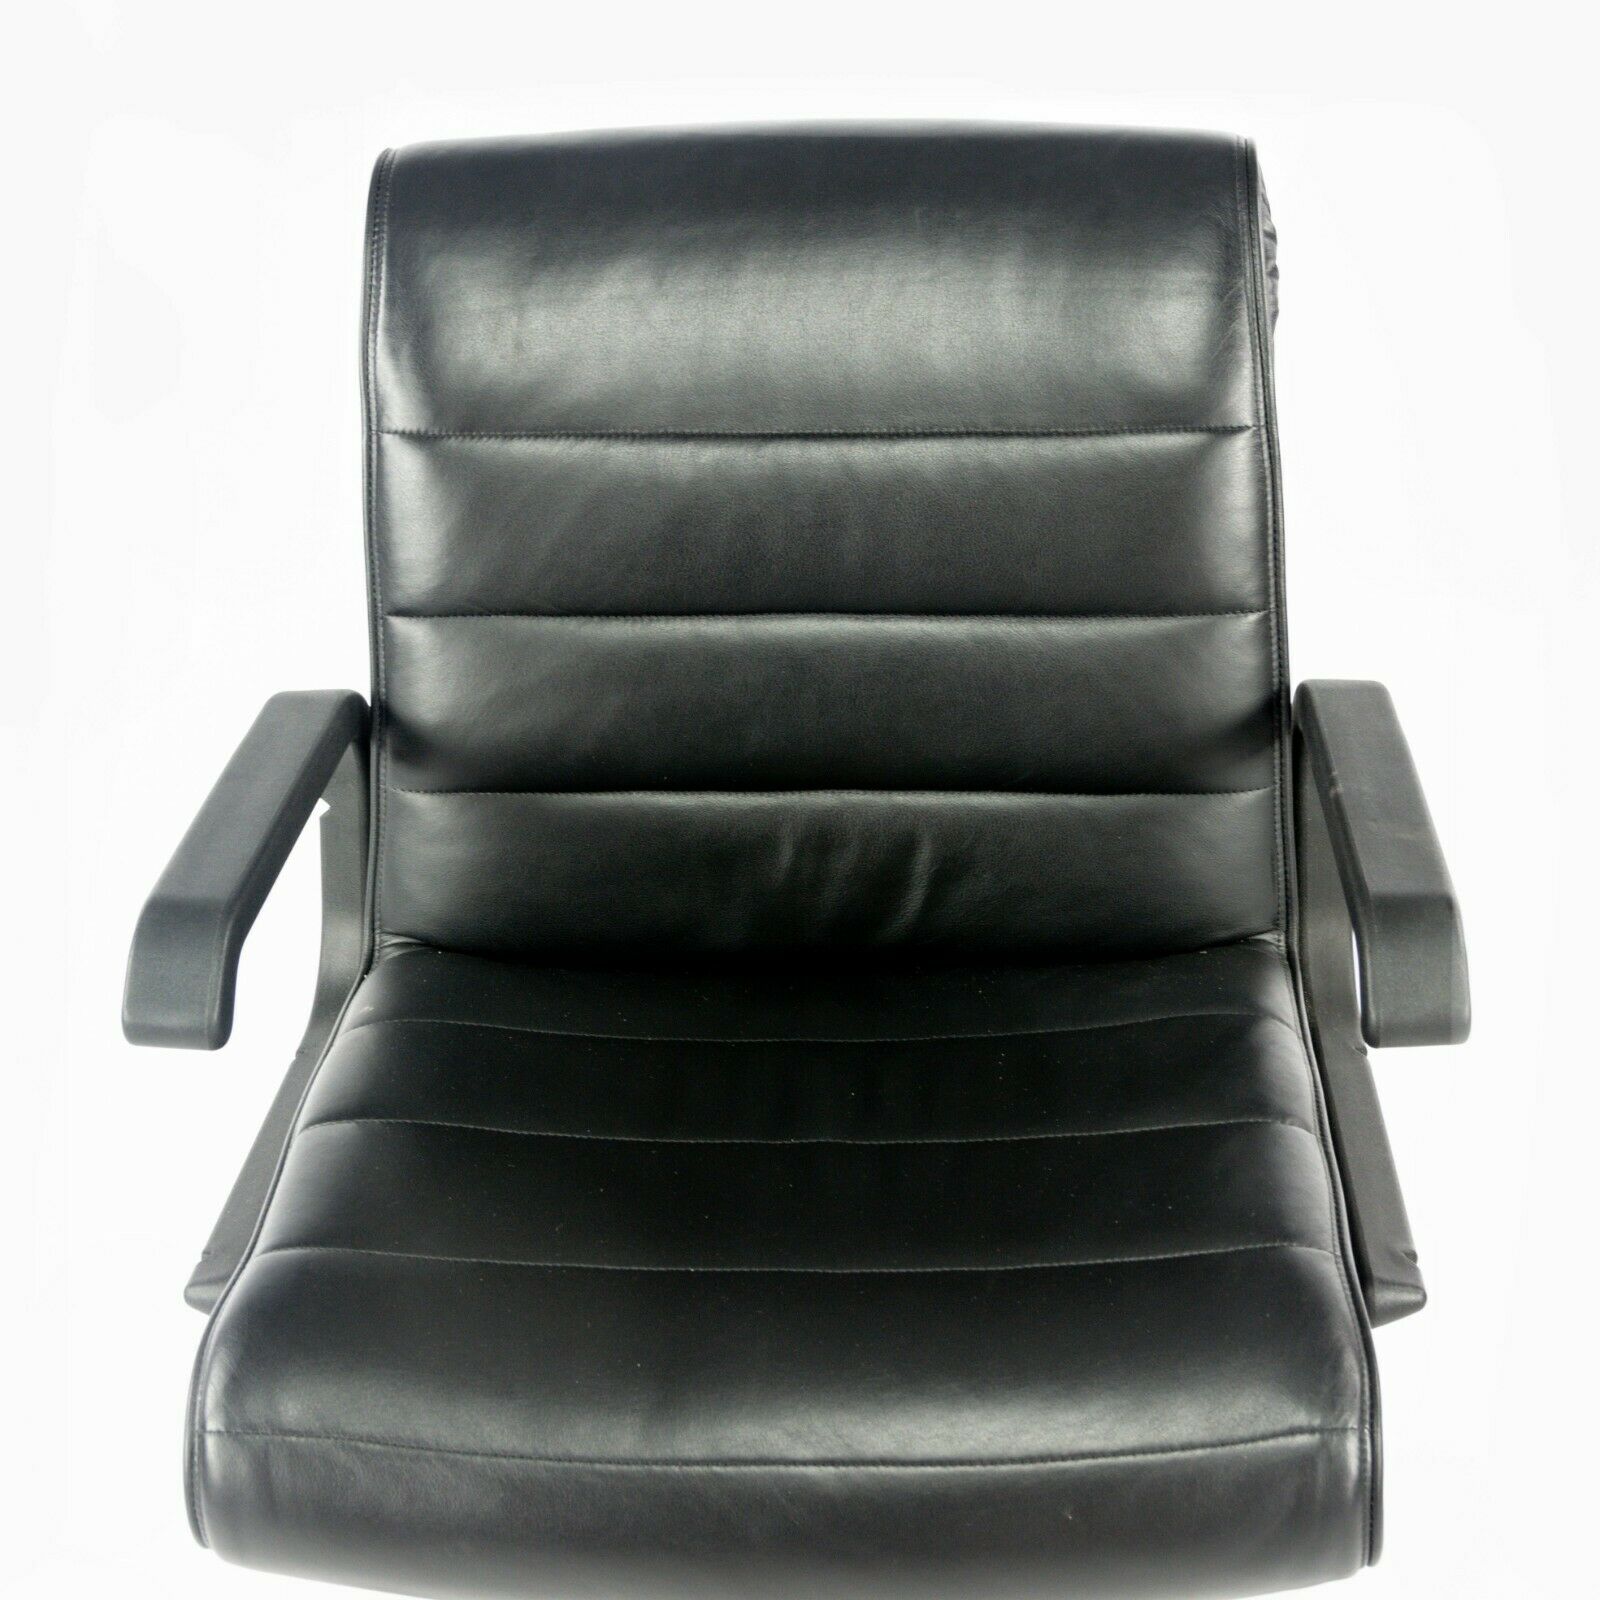 SOLD 2006 Richard Sapper for Knoll Management Desk Chair in Black Toscana Leather